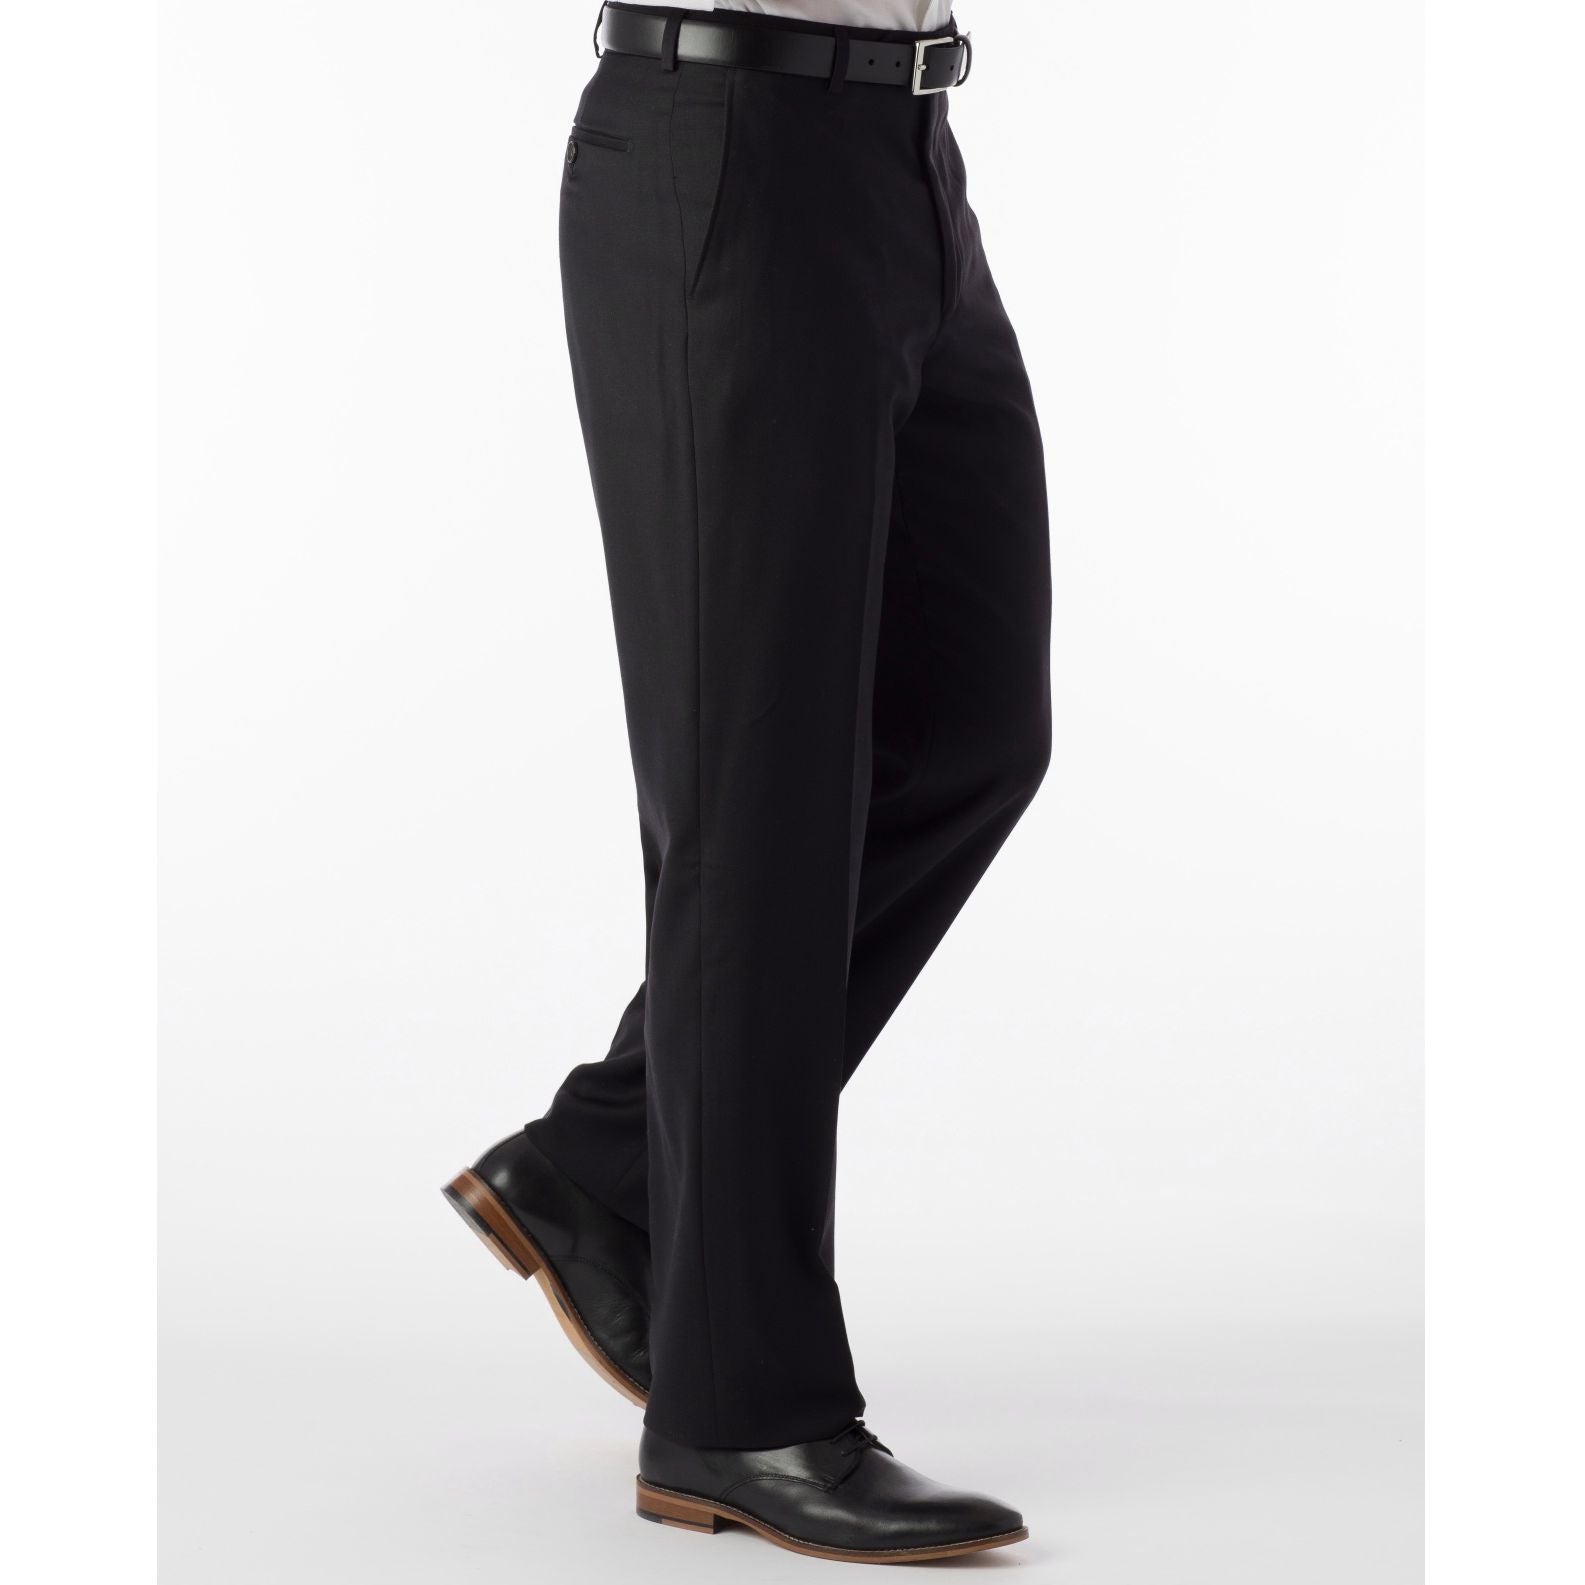 Super 120s Wool Travel Twill Comfort-EZE Trouser in Black (Flat Front Models) by Ballin